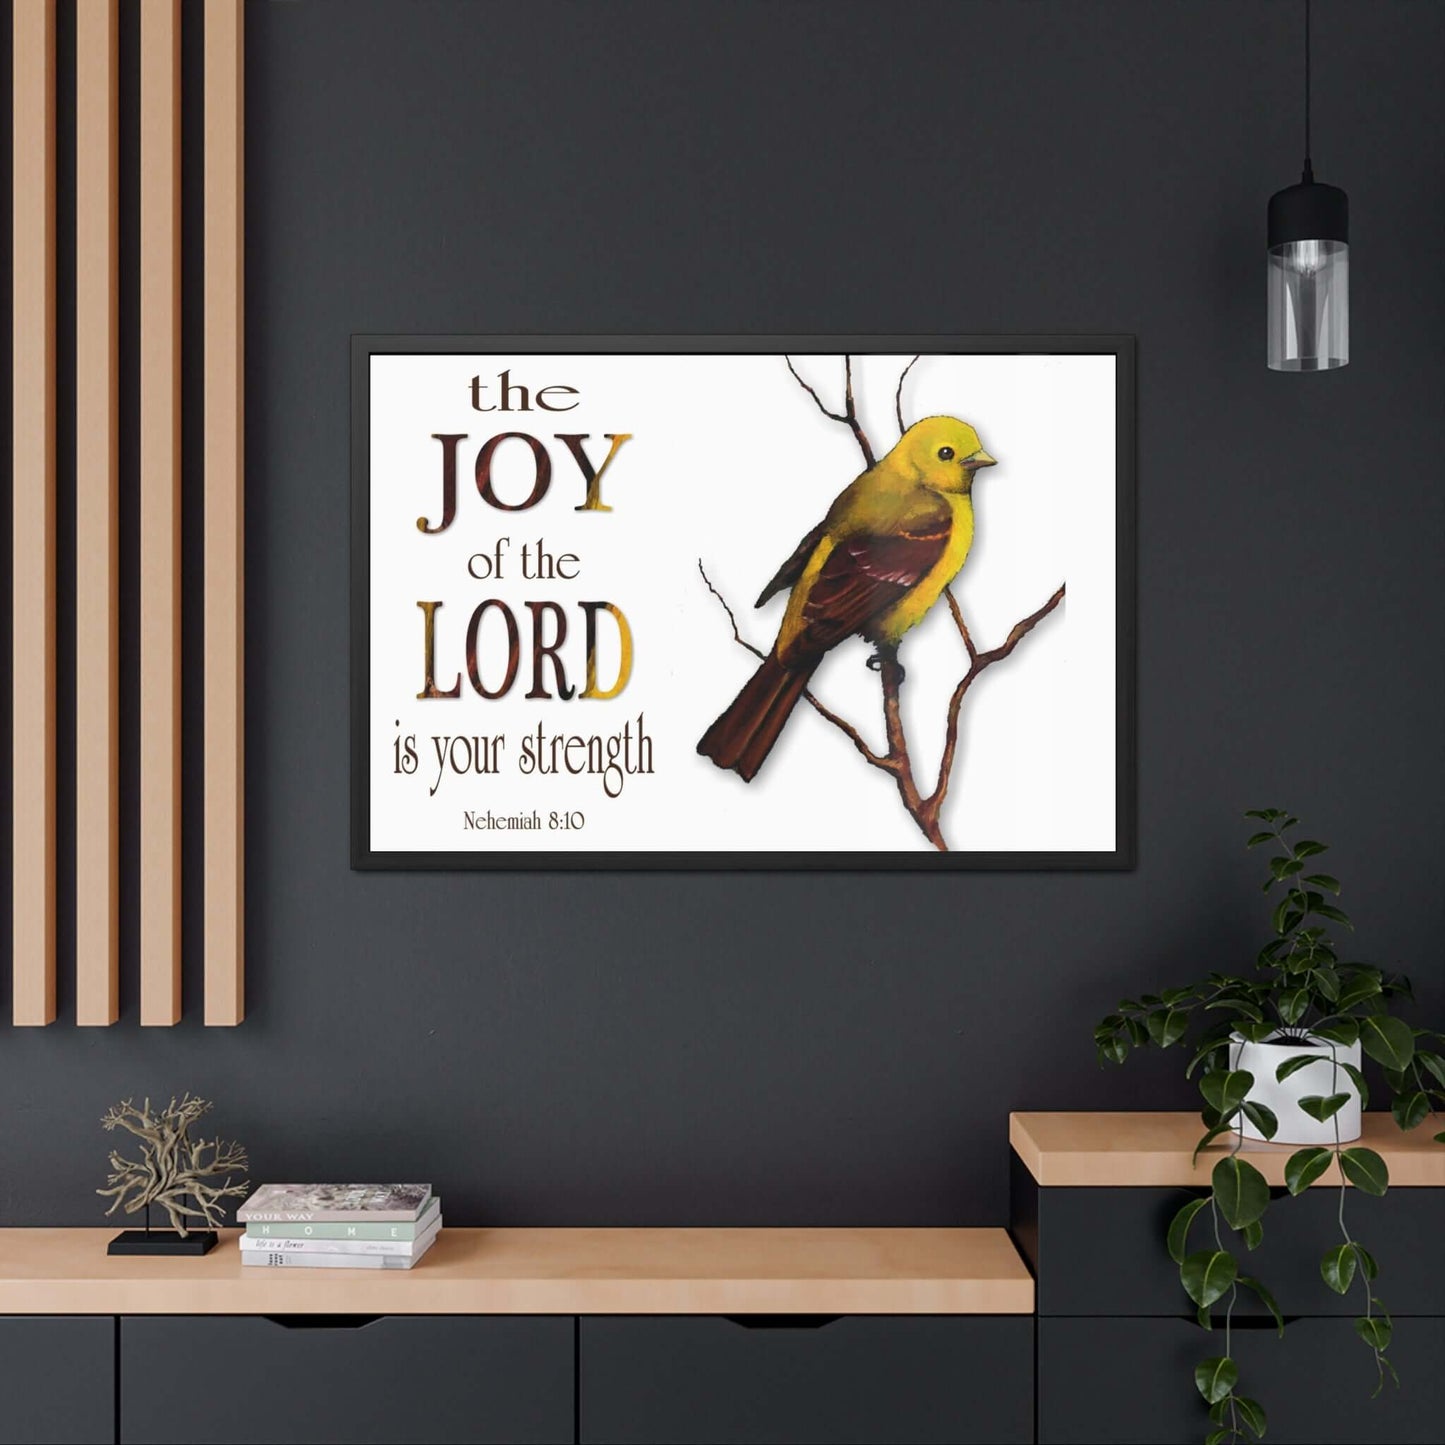 Framed Poster with Hand-Crafted Wooden Frame - Featuring Nehemiah 8:10 | Art & Wall Decor,Framed,Hanging Hardware,Home & Living,Poster,Posters